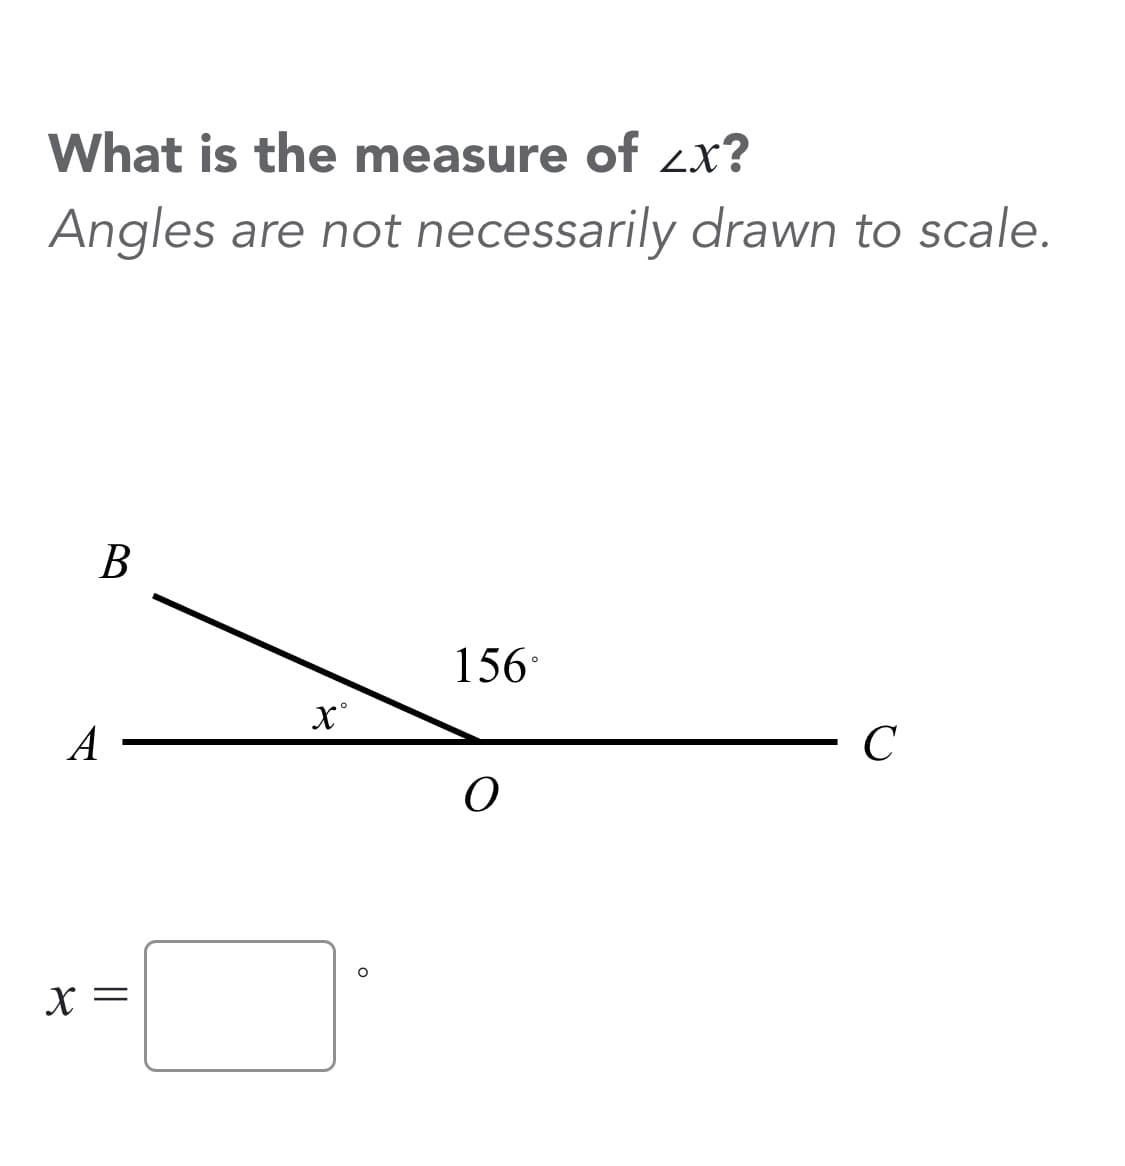 What is the measure of zx?
Angles are not necessarily drawn to scale.
B
156
A
X =
